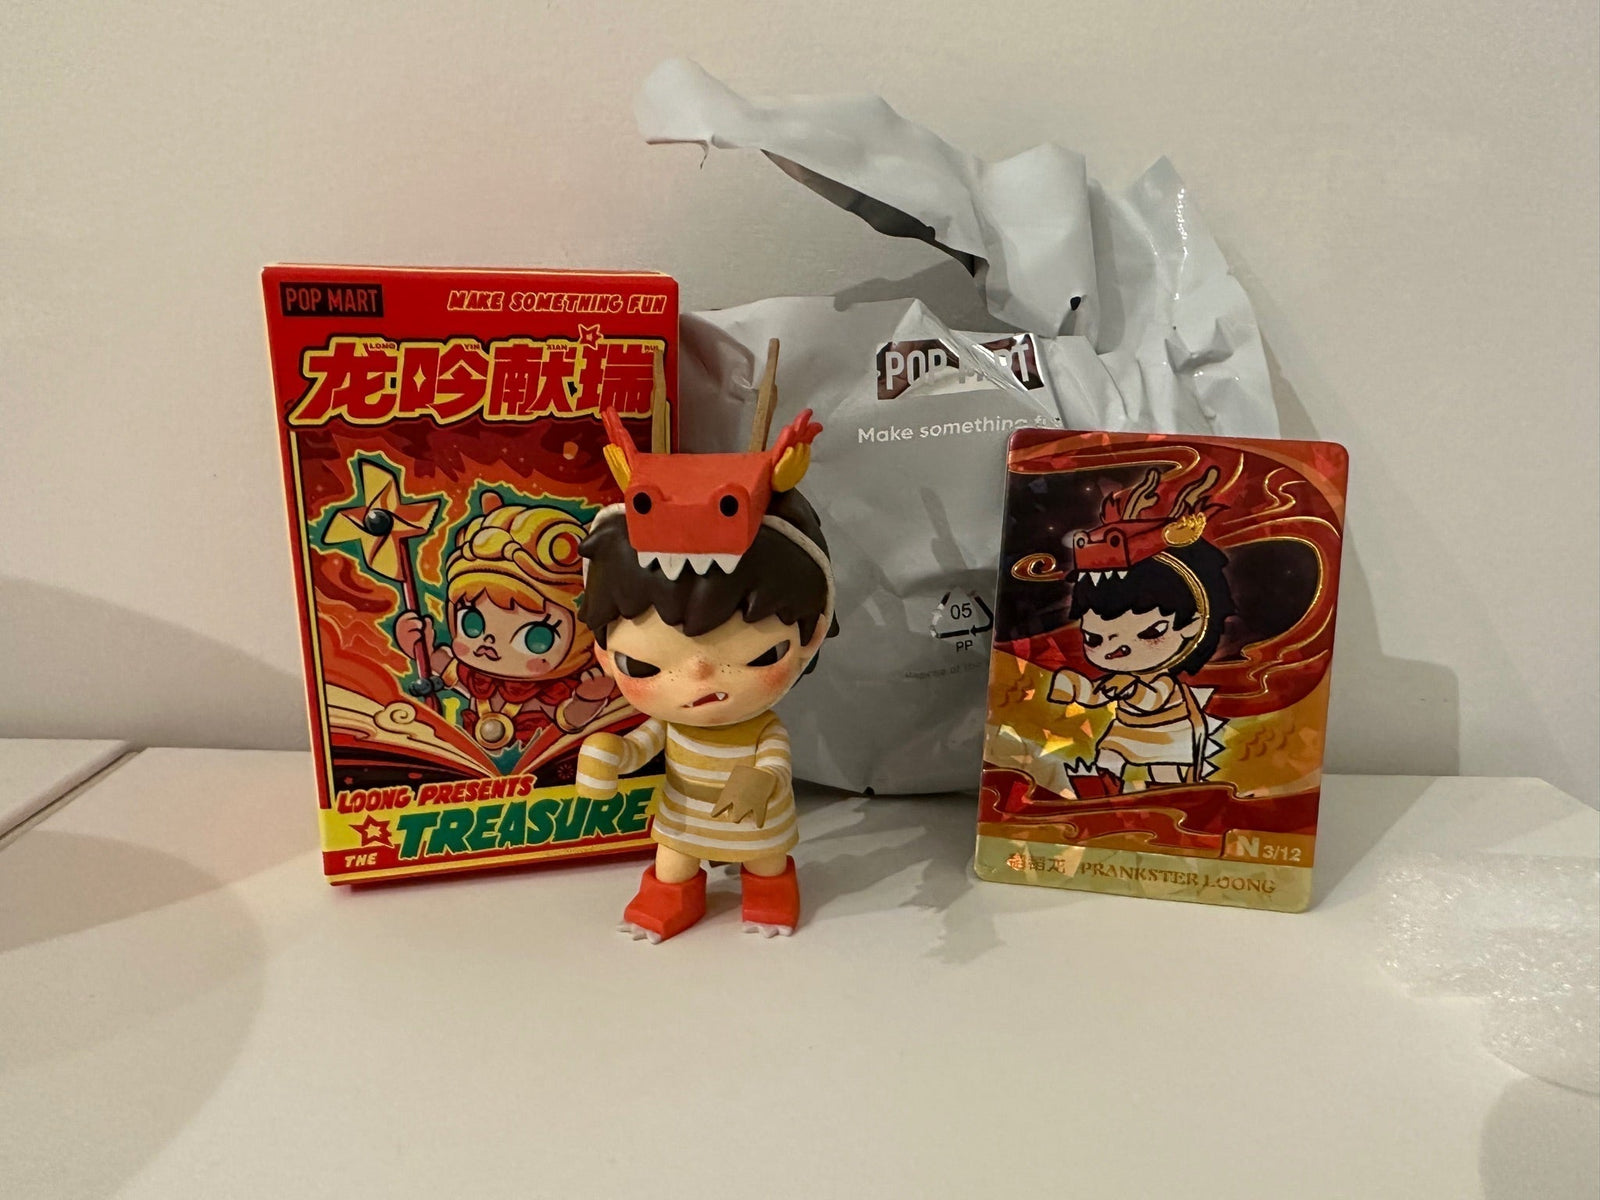 (Hirono) PRANKSTER LOONG - Loong Presents the Treasure Series Figures by POP MART - 1